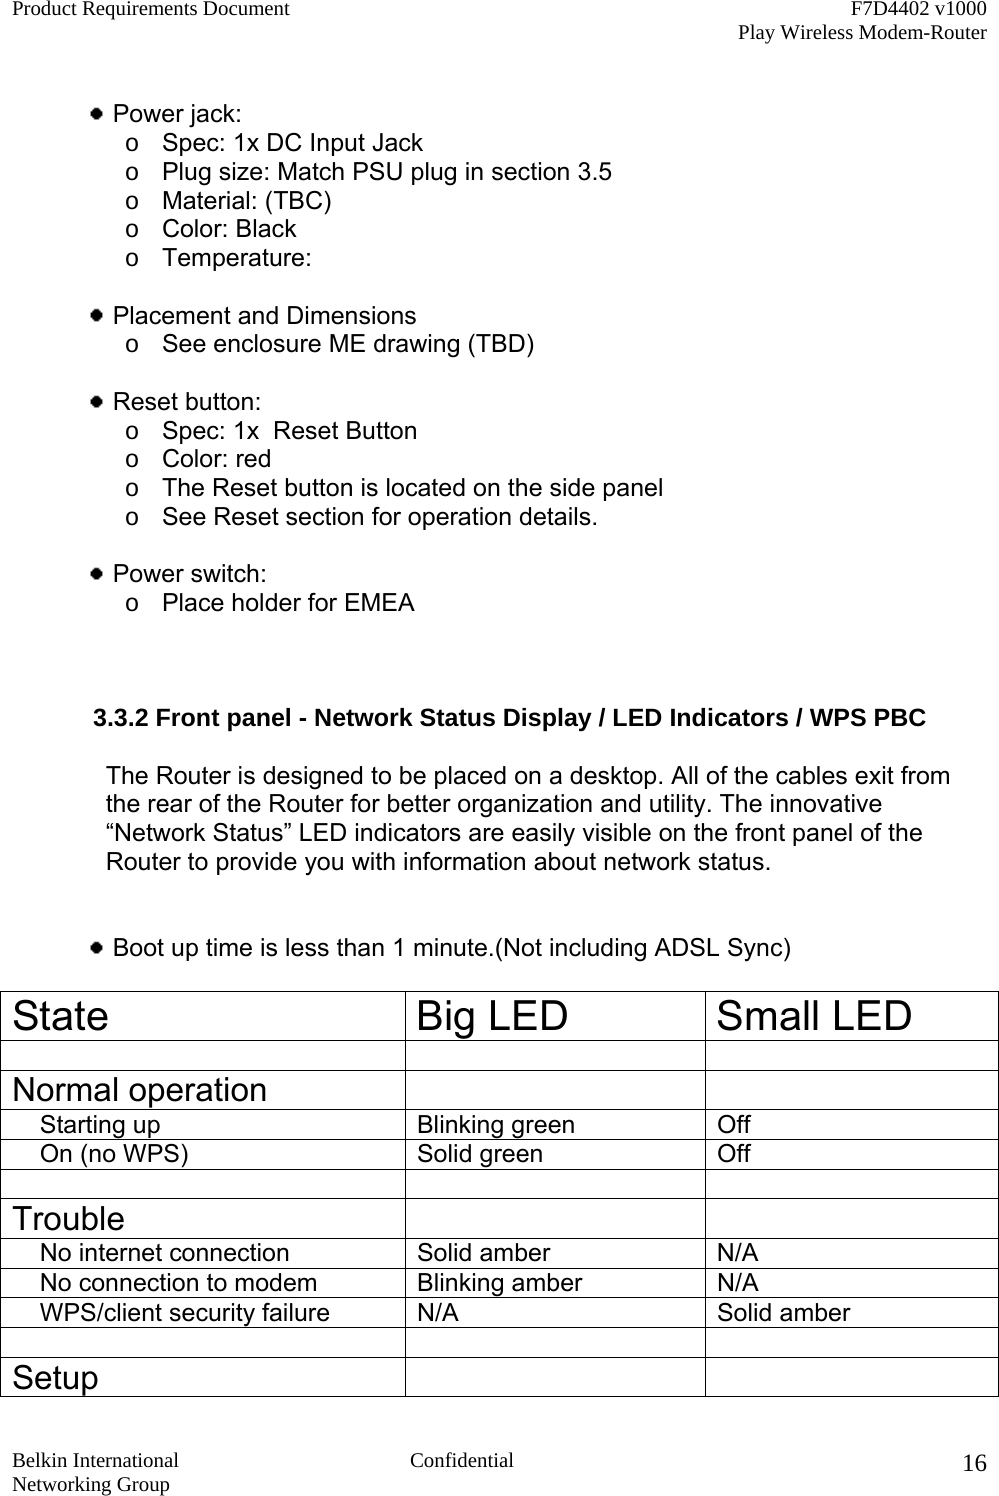 Product Requirements Document    F7D4402 v1000     Play Wireless Modem-Router  Belkin International  Confidential Networking Group 16  Power jack:       o  Spec: 1x DC Input Jack o  Plug size: Match PSU plug in section 3.5 o  Material: (TBC) o  Color: Black o  Temperature:   Placement and Dimensions o  See enclosure ME drawing (TBD)   Reset button:   o  Spec: 1x  Reset Button o  Color: red o  The Reset button is located on the side panel o  See Reset section for operation details.   Power switch:   o  Place holder for EMEA              3.3.2 Front panel - Network Status Display / LED Indicators / WPS PBC  The Router is designed to be placed on a desktop. All of the cables exit from the rear of the Router for better organization and utility. The innovative “Network Status” LED indicators are easily visible on the front panel of the Router to provide you with information about network status.    Boot up time is less than 1 minute.(Not including ADSL Sync)  State Big LED Small LED    Normal operation        Starting up  Blinking green  Off     On (no WPS) Solid green Off    Trouble        No internet connection Solid amber  N/A     No connection to modem  Blinking amber  N/A     WPS/client security failure  N/A  Solid amber    Setup    